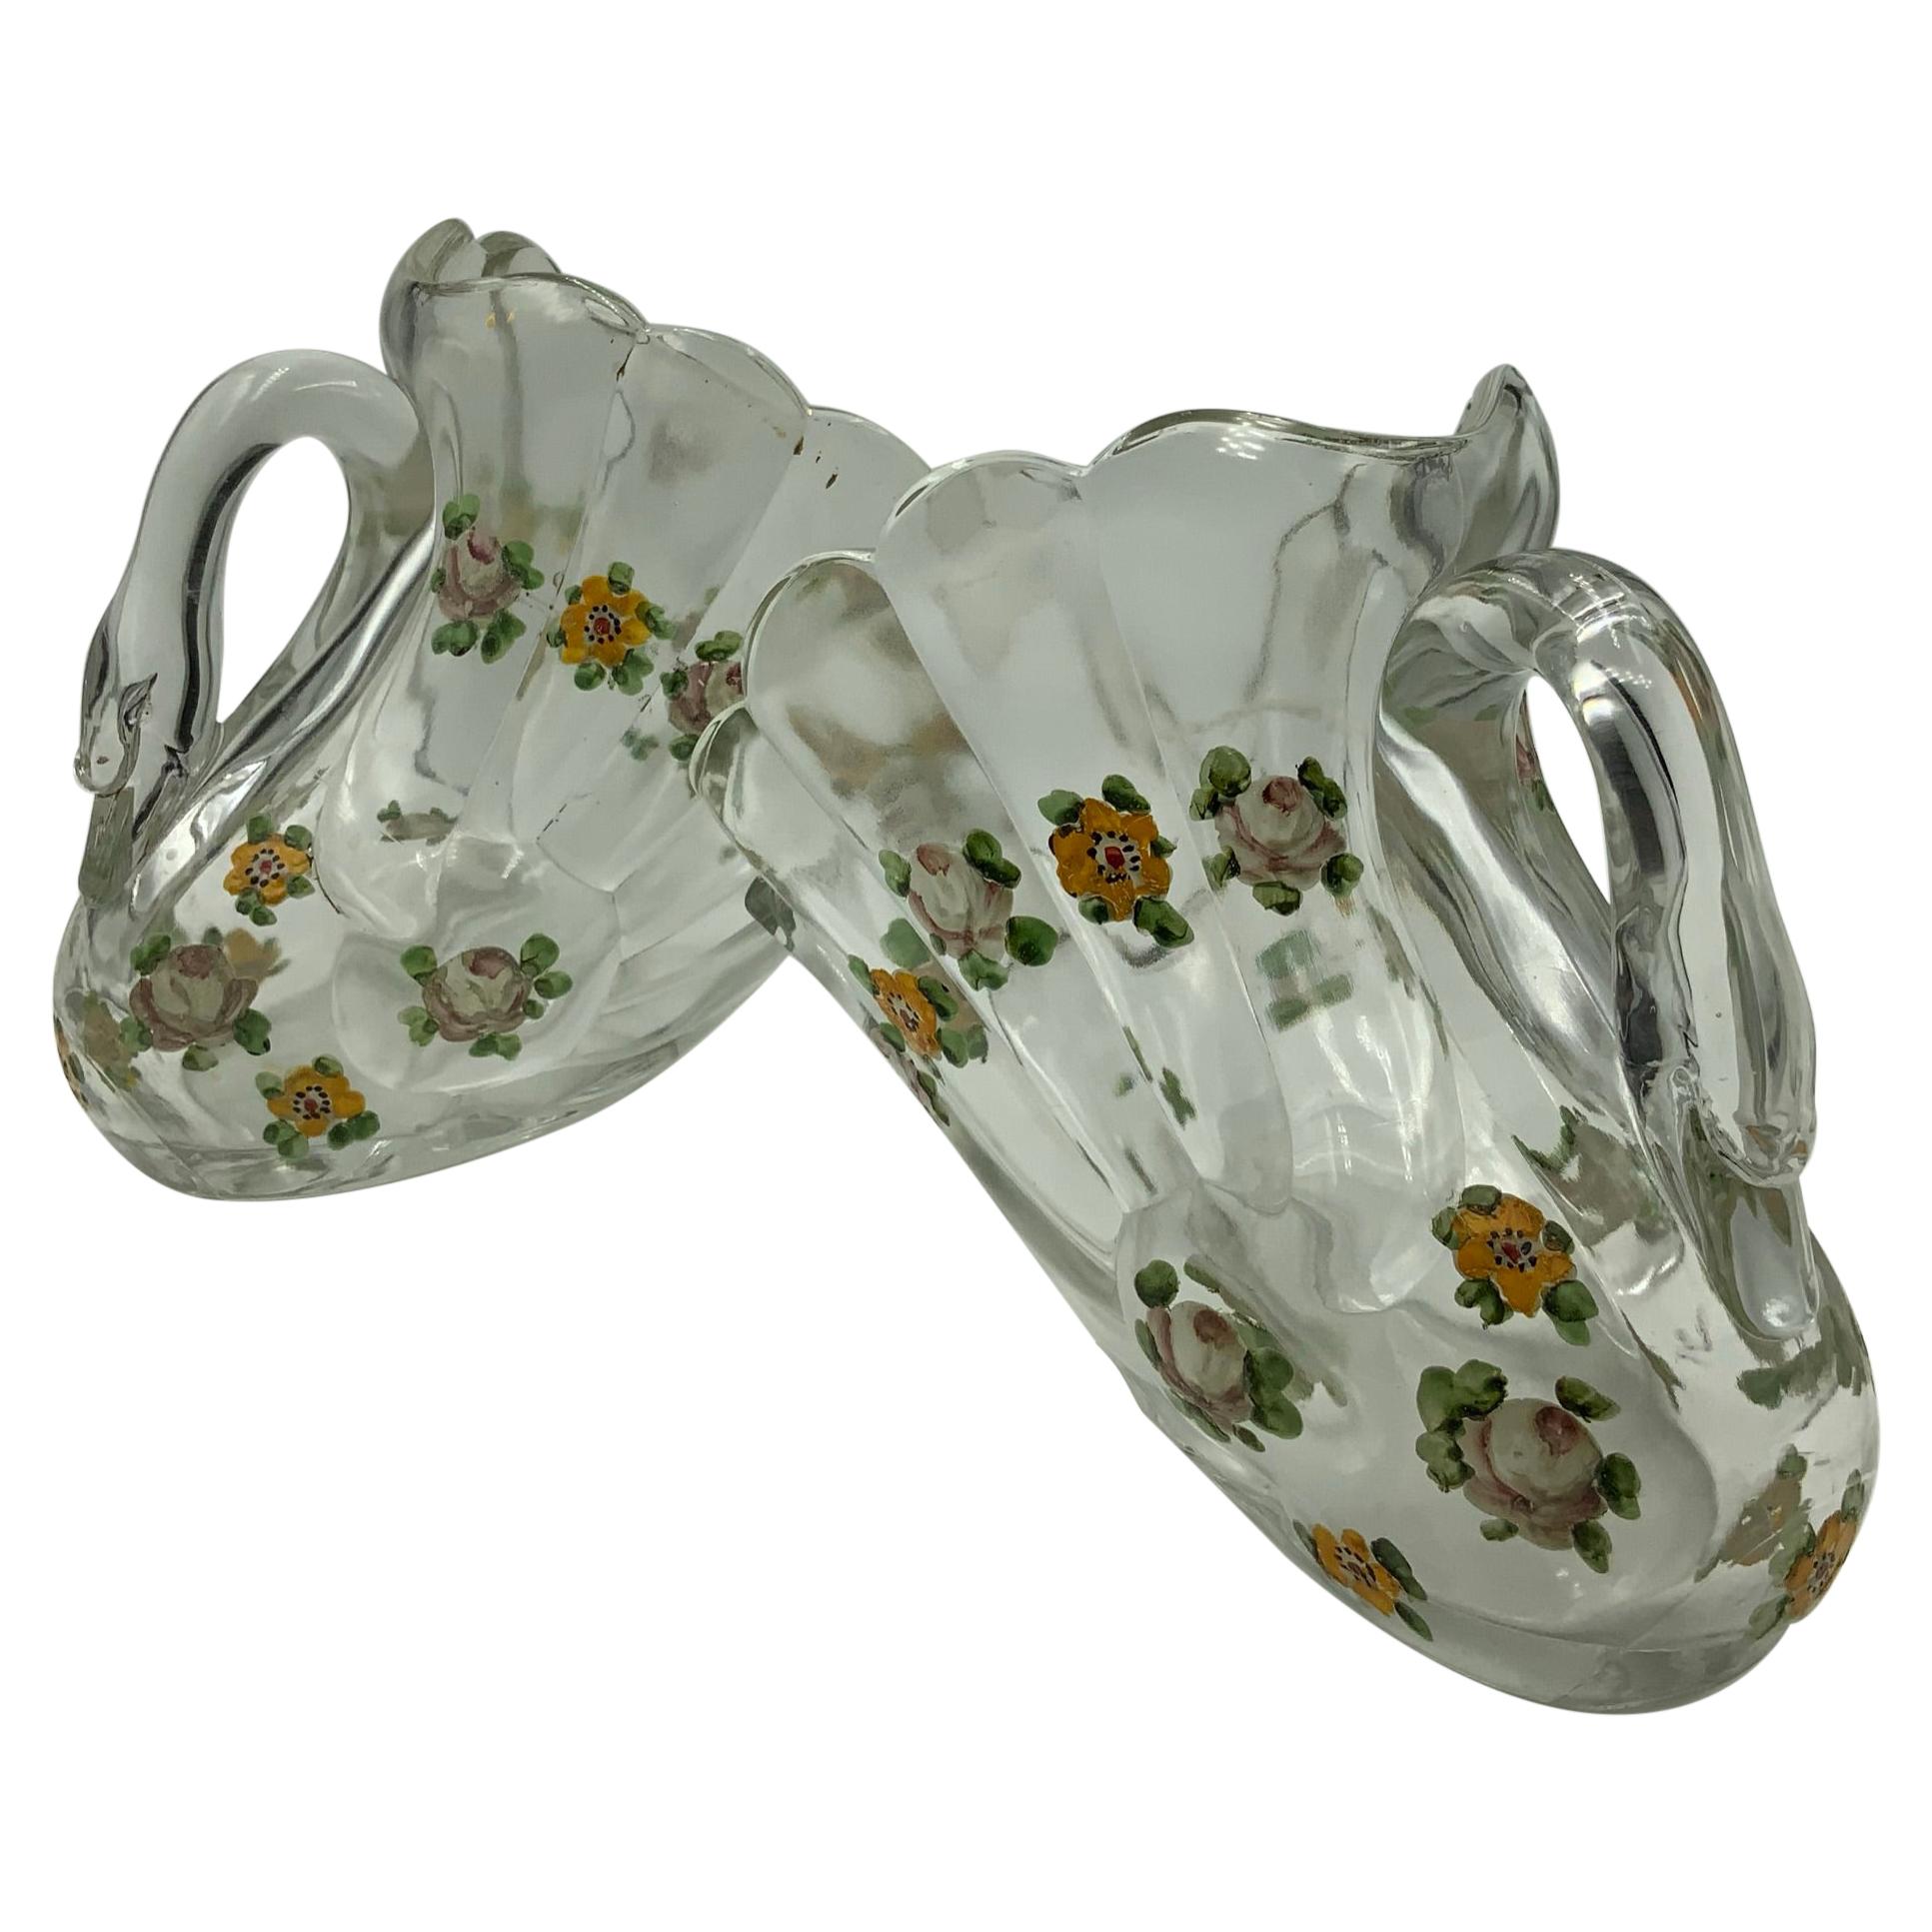 Pair of Hand Painted Swan Depression Glass Vases Planters Bread Serving Baskets For Sale